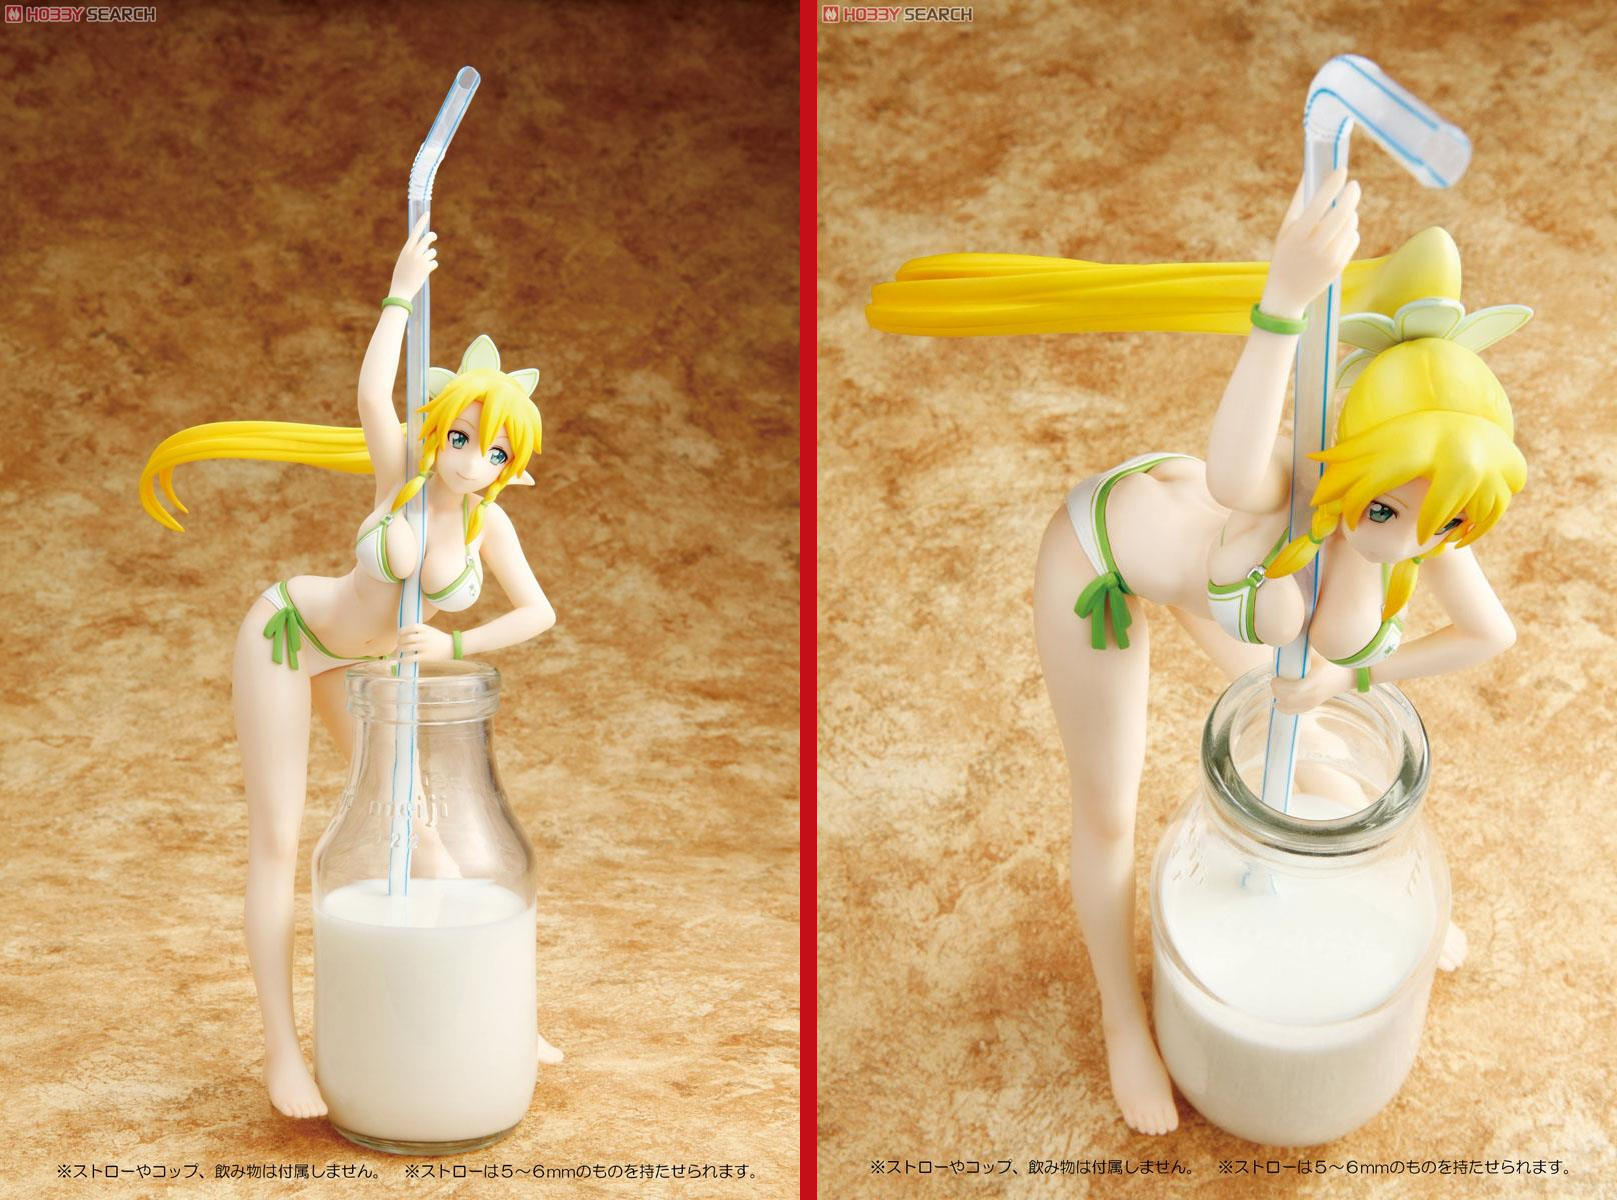 Anime figure with straw-holding cleavage is the perfect way to enjoy a nice  glass of milk | SoraNews24 -Japan News-